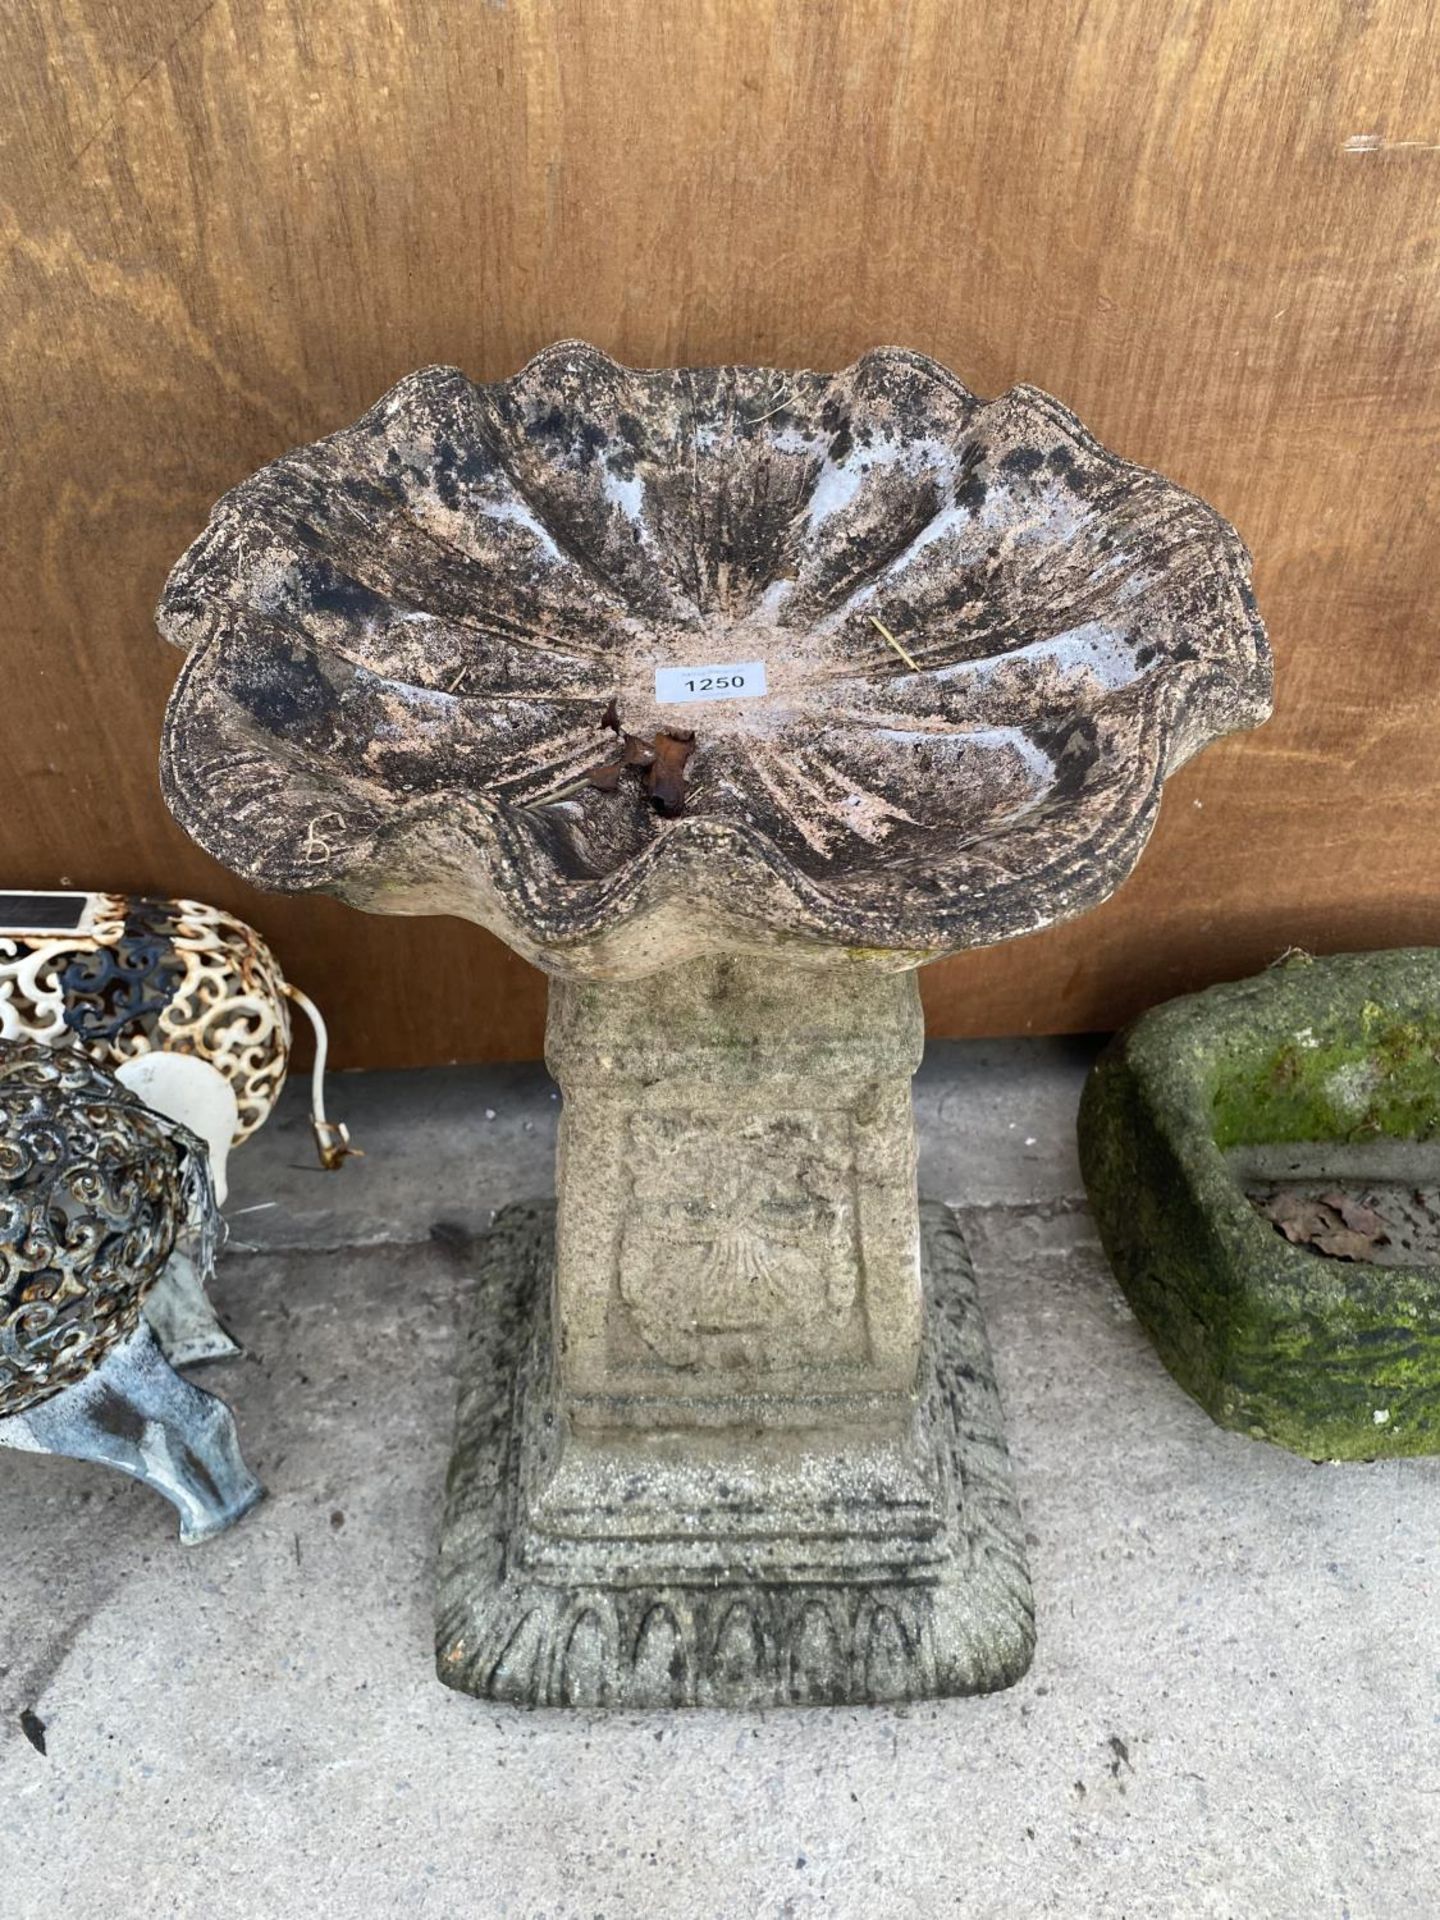 A RECONSTITUTED STONE BIRD BATH WITH PEDASTEL BASE